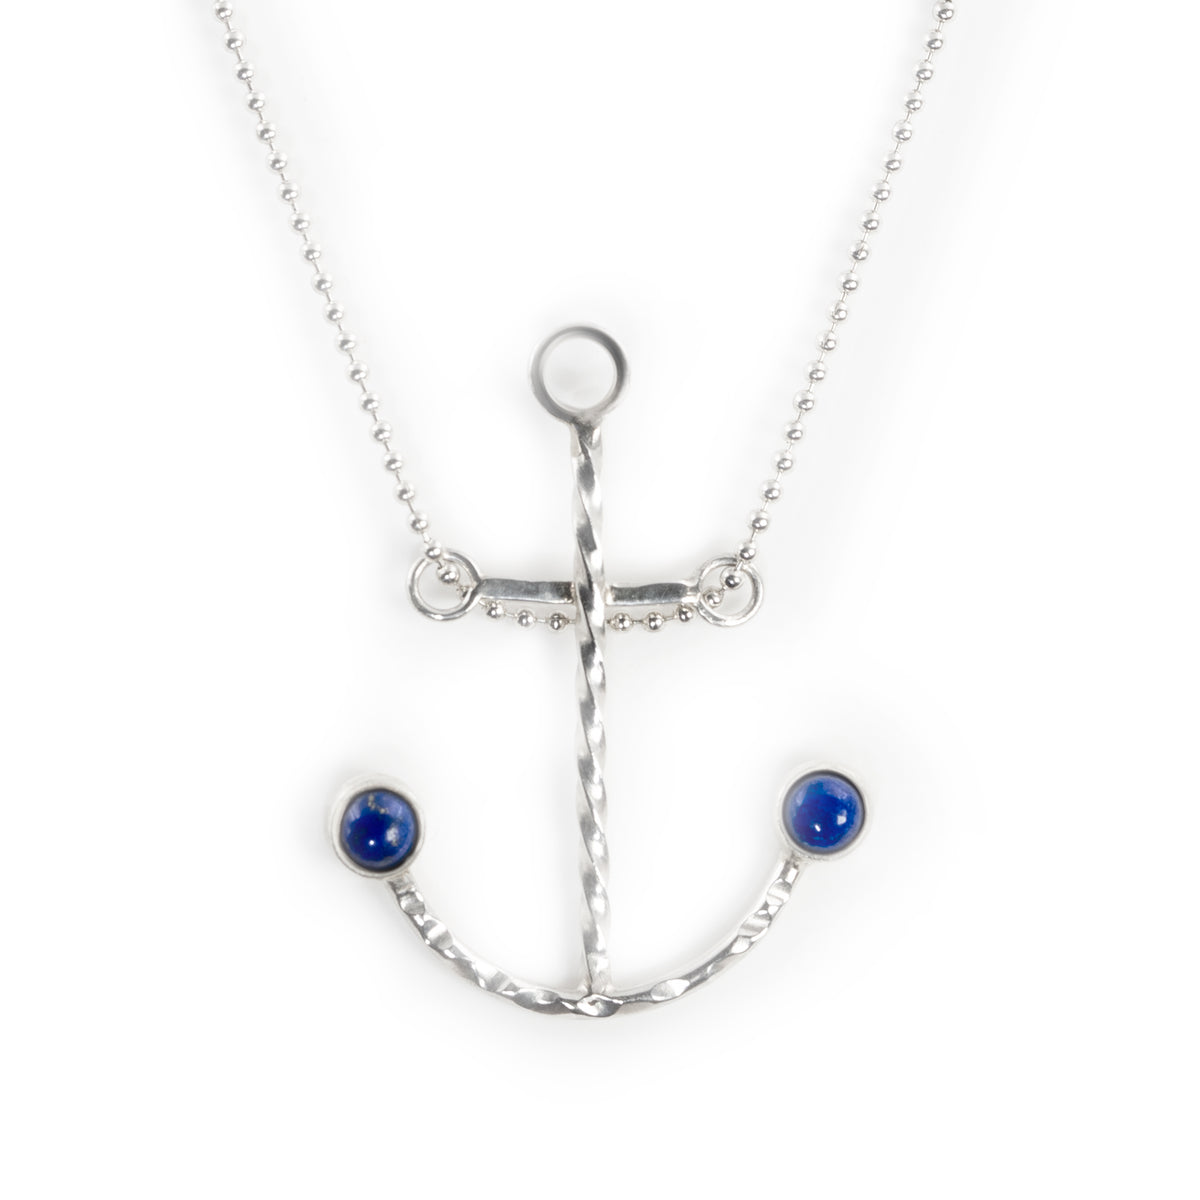 Silver steadfast necklace with lapis lazuli stones.